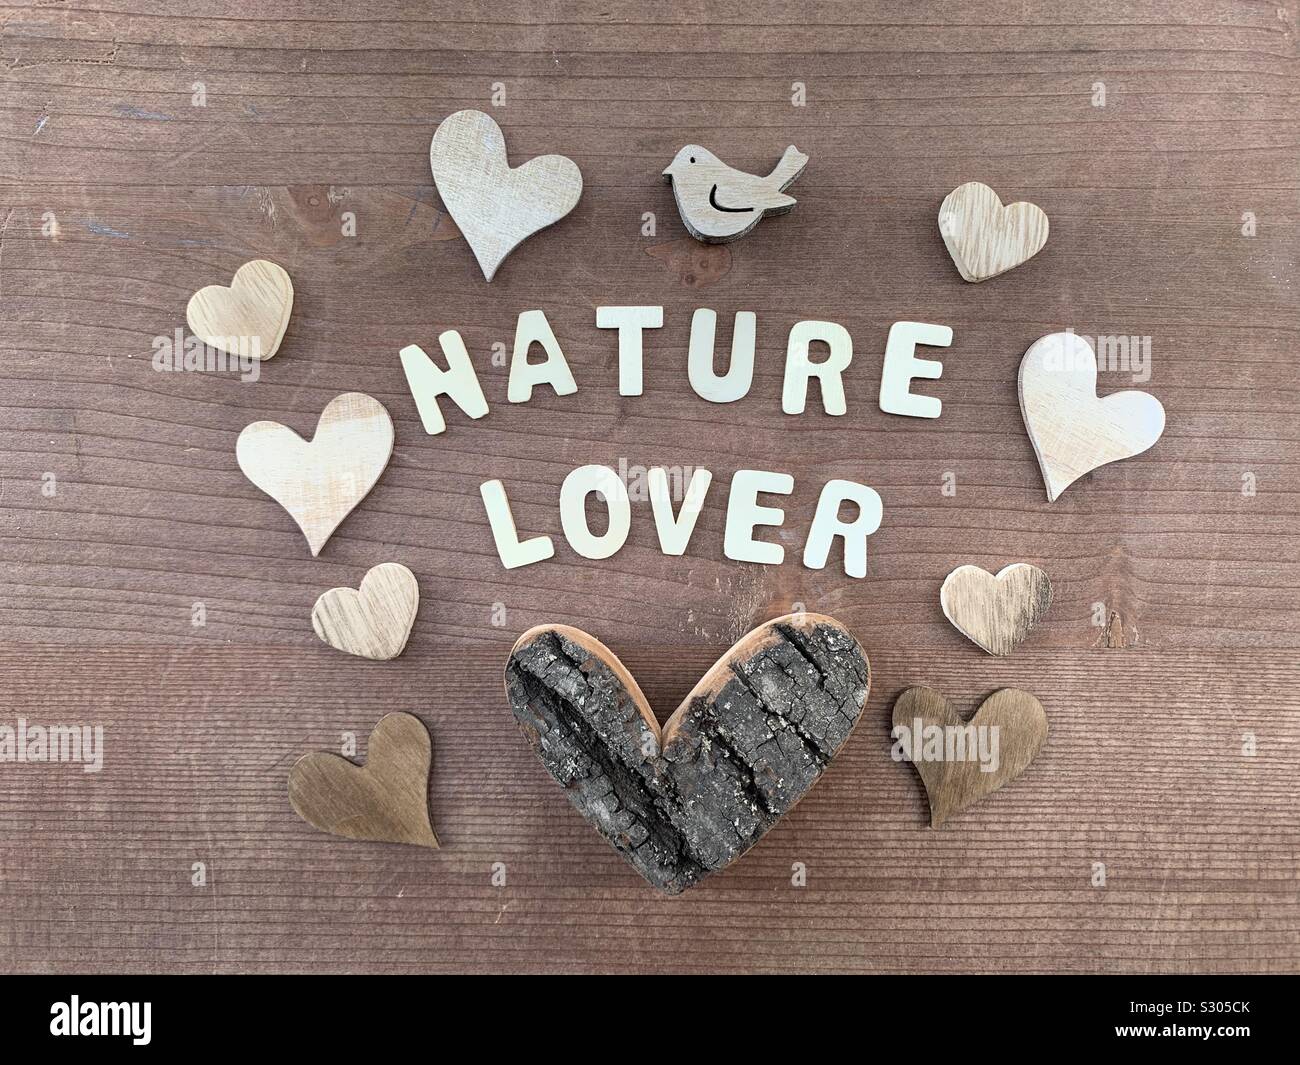 Nature lover text composed with wooden letters and hearts on a wooden board Stock Photo